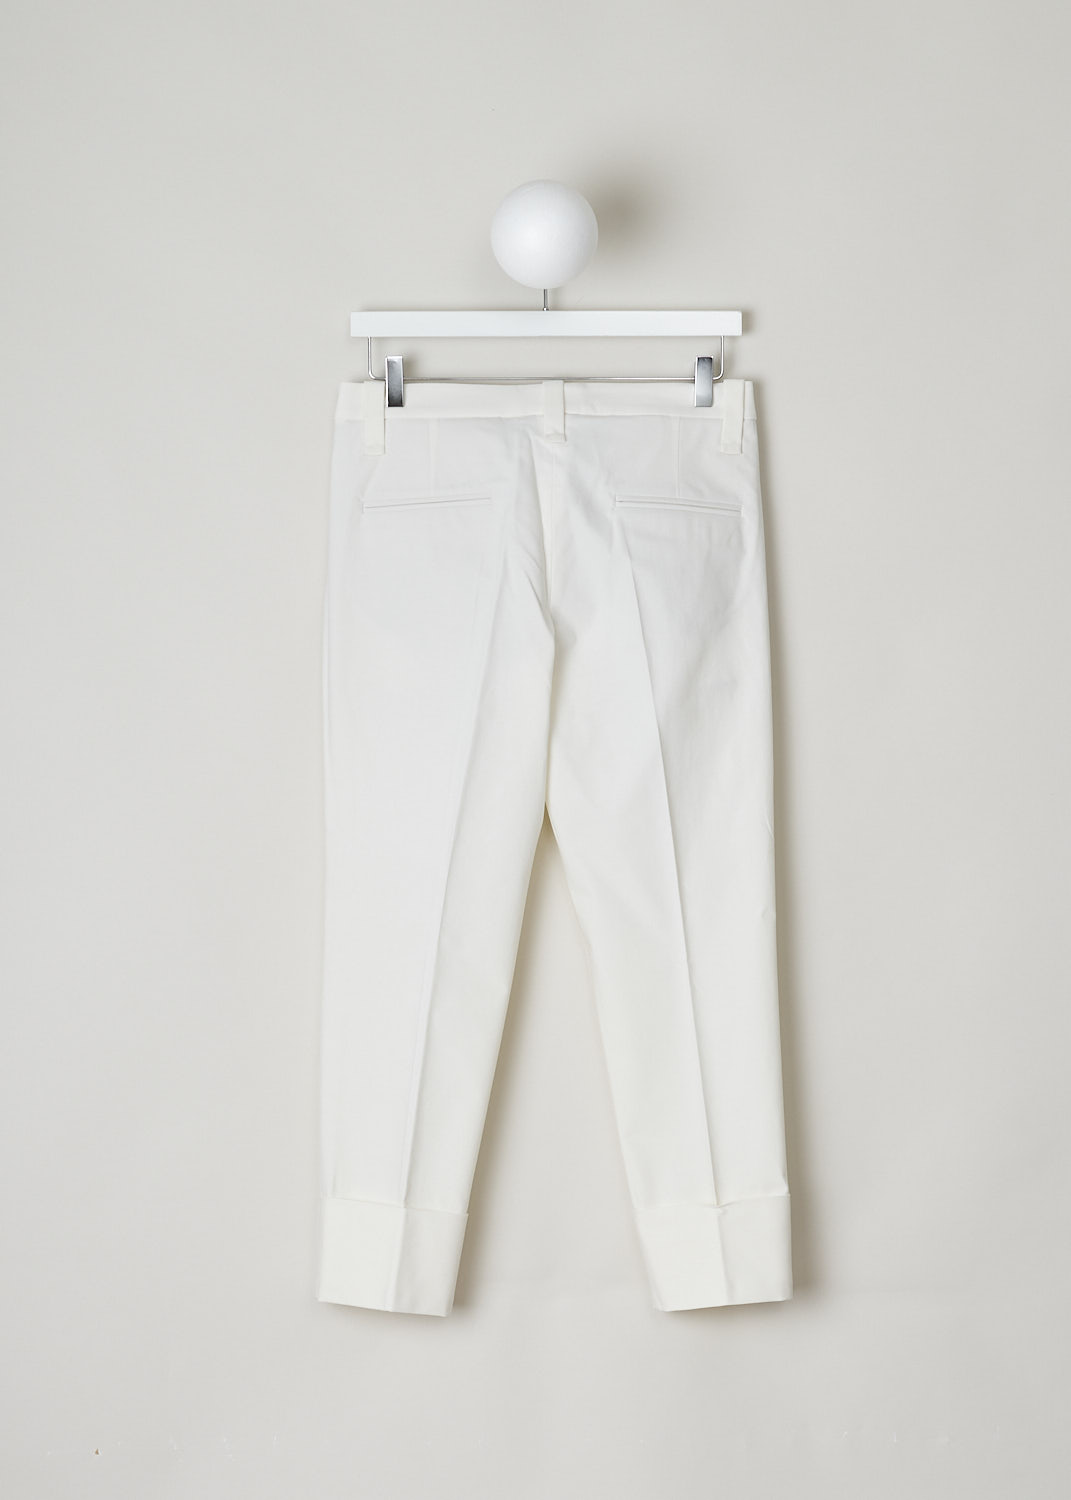 BRUNELLO CUCINELLI, WHITE CHINO WITH FOLD-OVER HEM, M0F70P1367_C7025, White, Back, A white chino made of a cotton blend. Featuring a clasp and zip closure, forward slanted pockets in the front and welt pockets on the back. The belt loops are a bit broader than usual. The pants legs have a folded hem.
